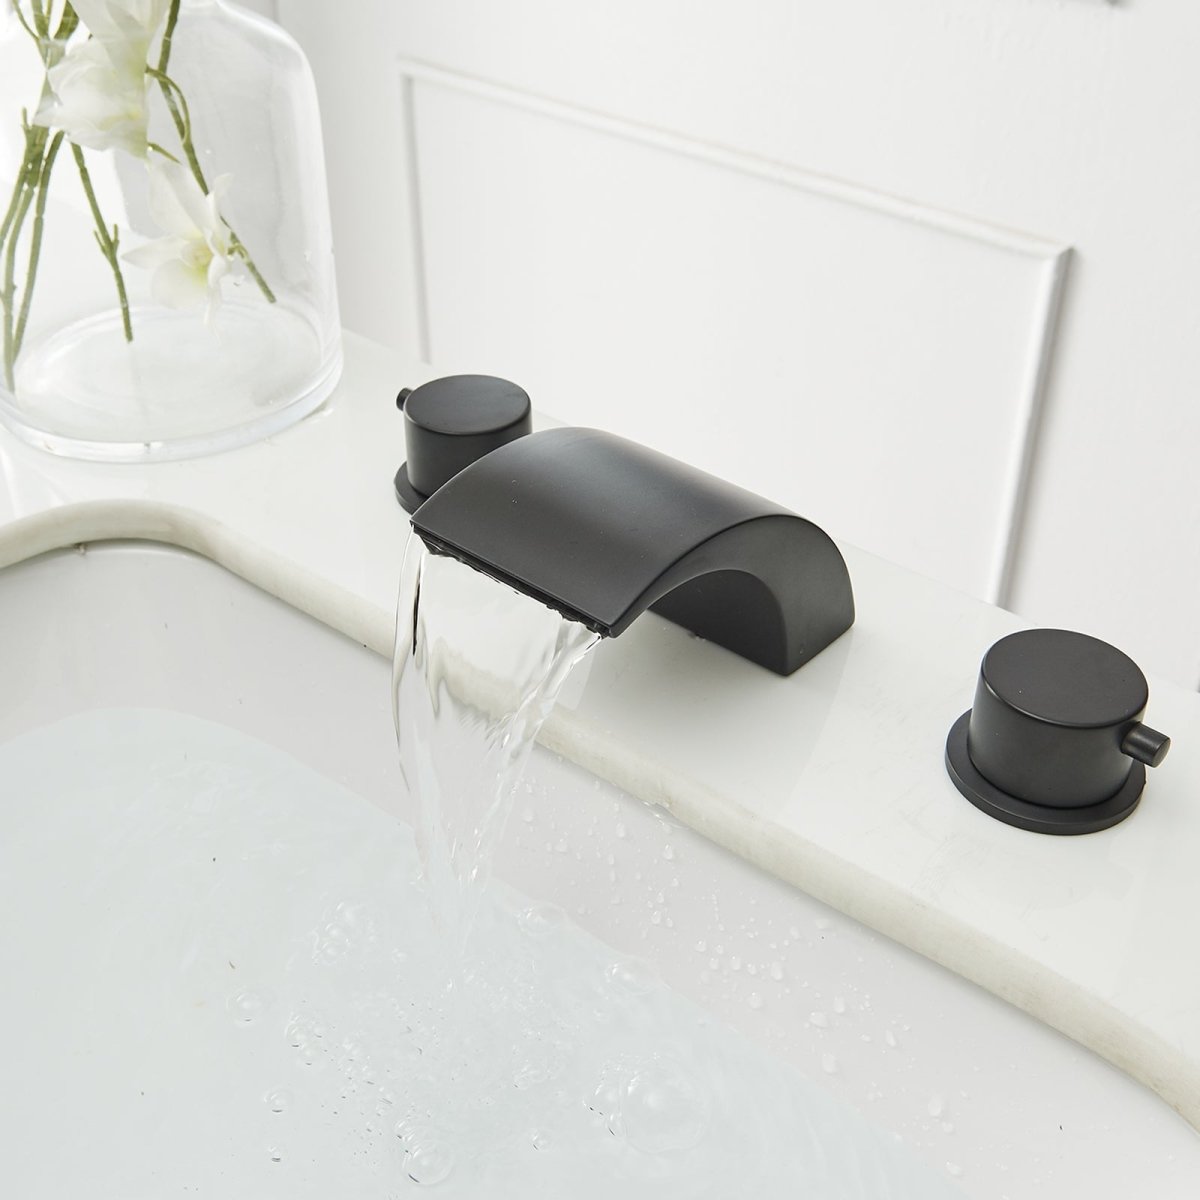 8 in Waterfall 2-Handle Bathroom Faucet With Led Light Black - buyfaucet.com